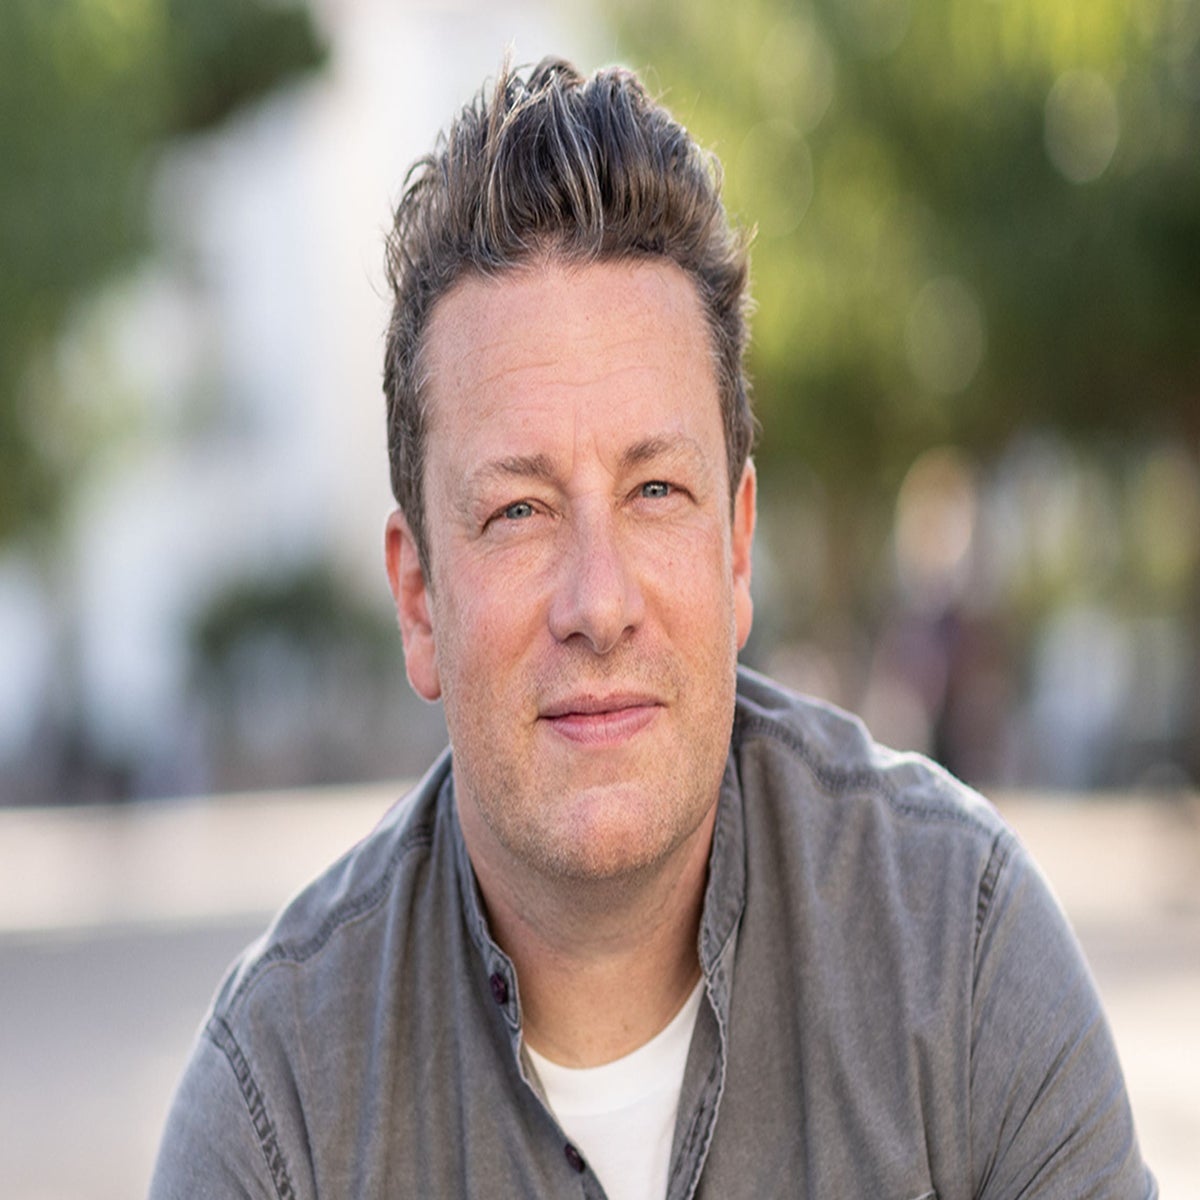 Jamie Oliver says he'd choose anonymity over fame if given the choice again